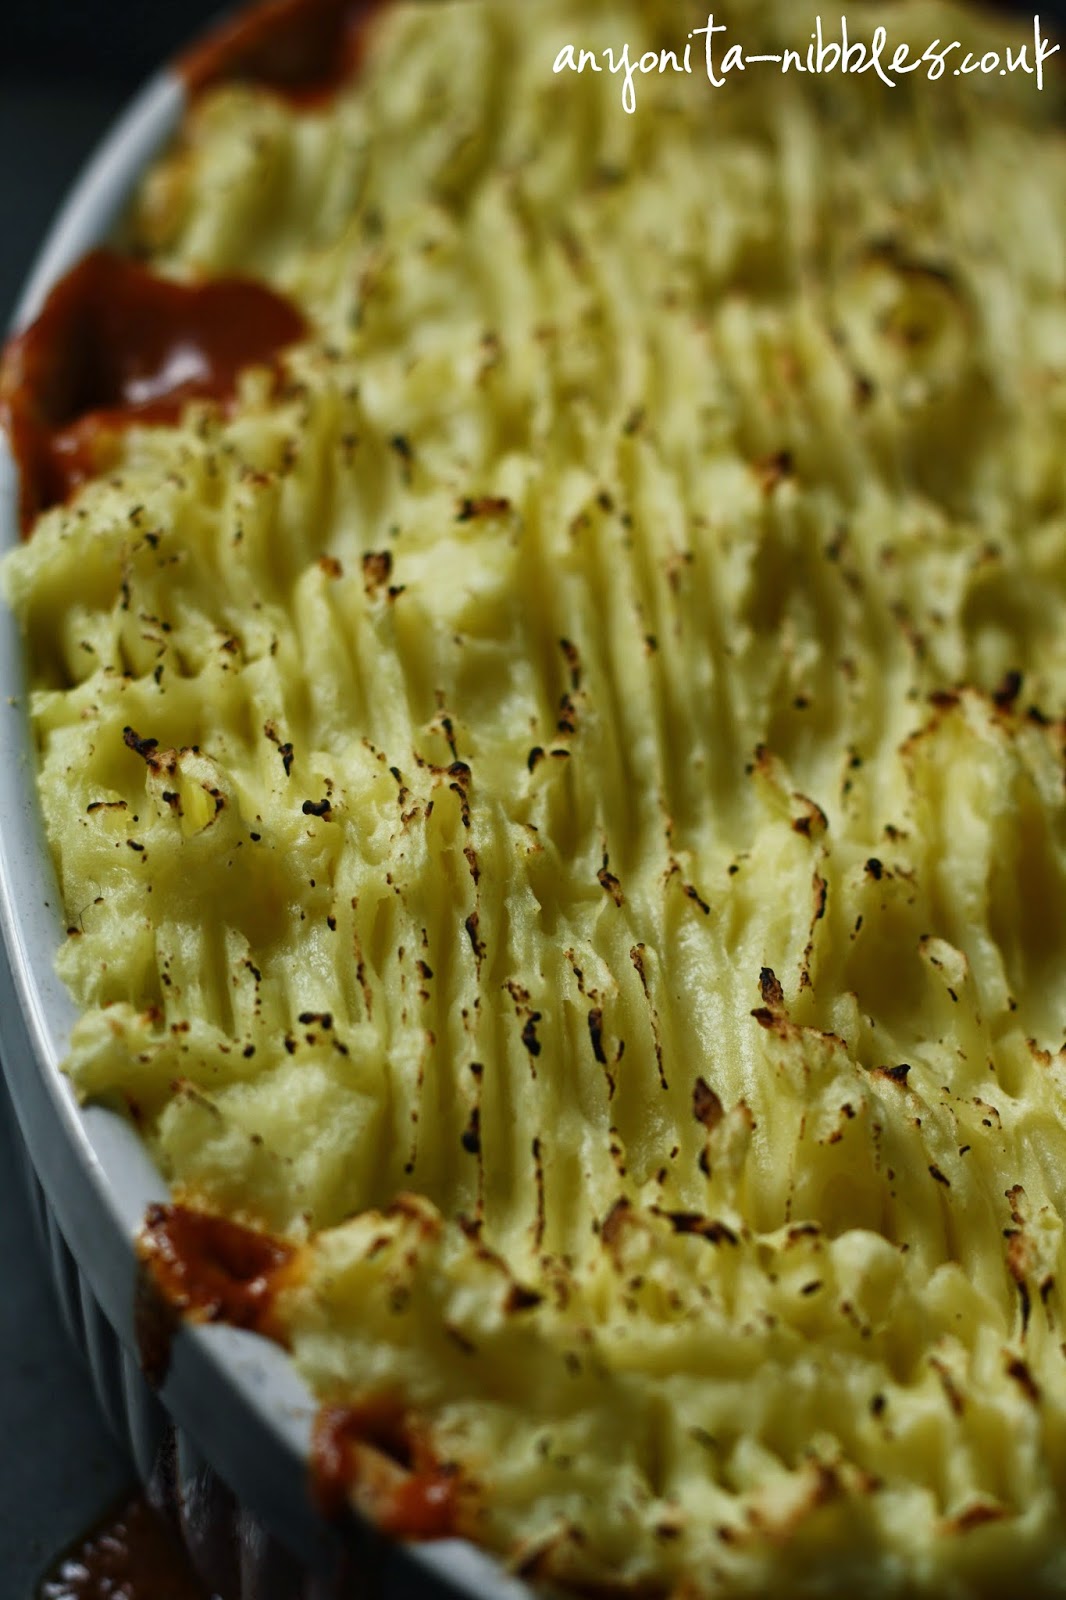 Mashed potatoes on a cottage pie from anyonita-nibbles.co.uk